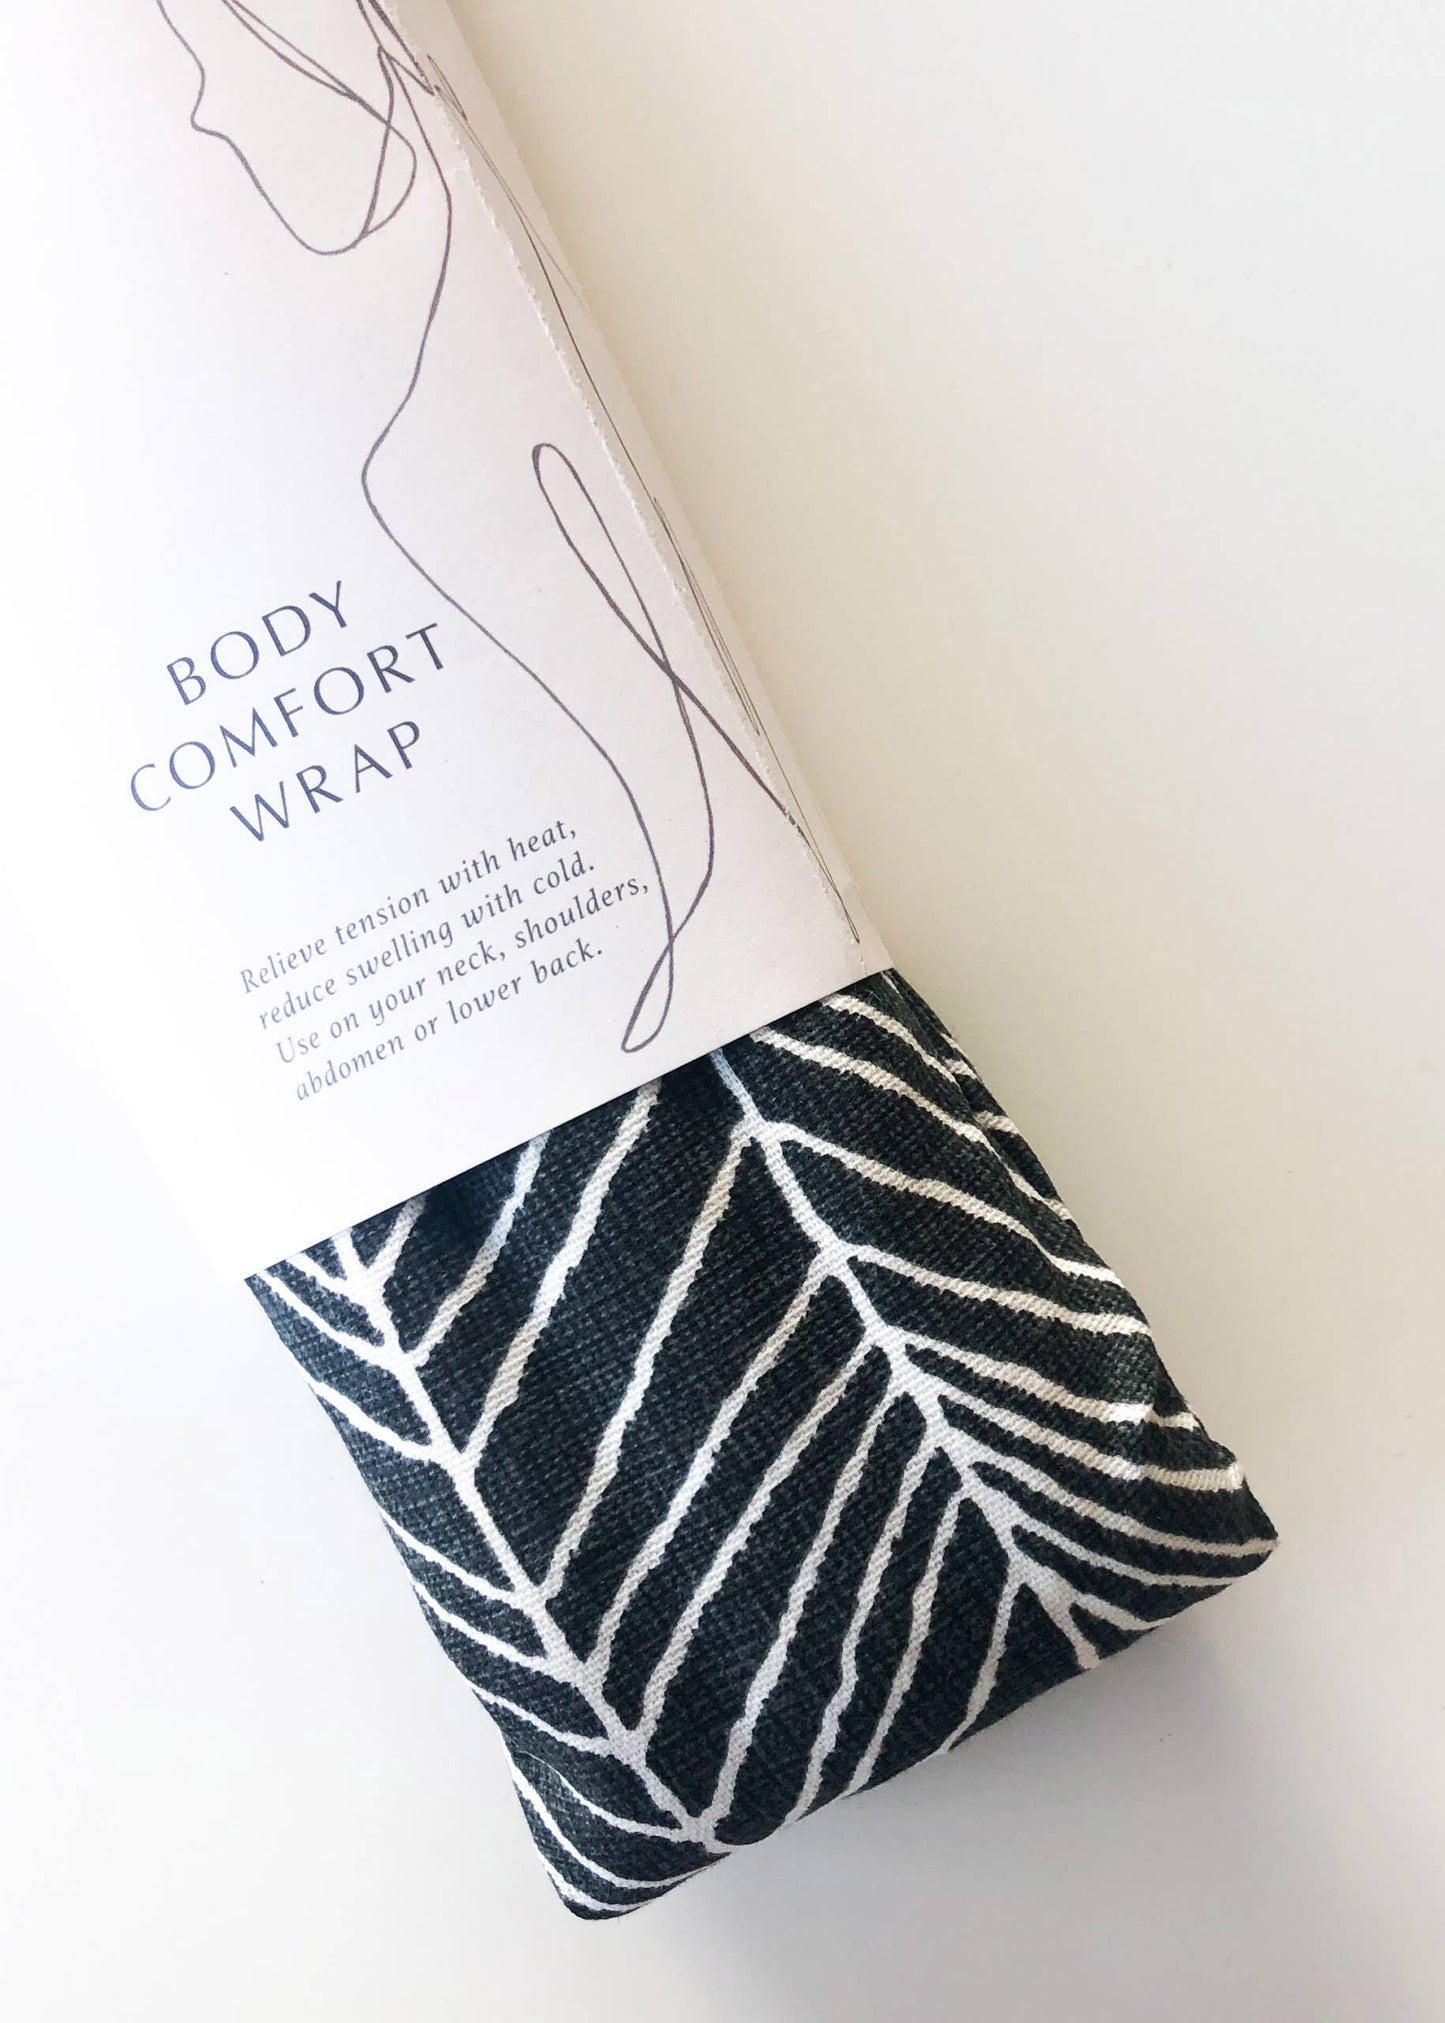 Hot + Cold Neck Therapy Wrap - Black and White Home & Lifestyle